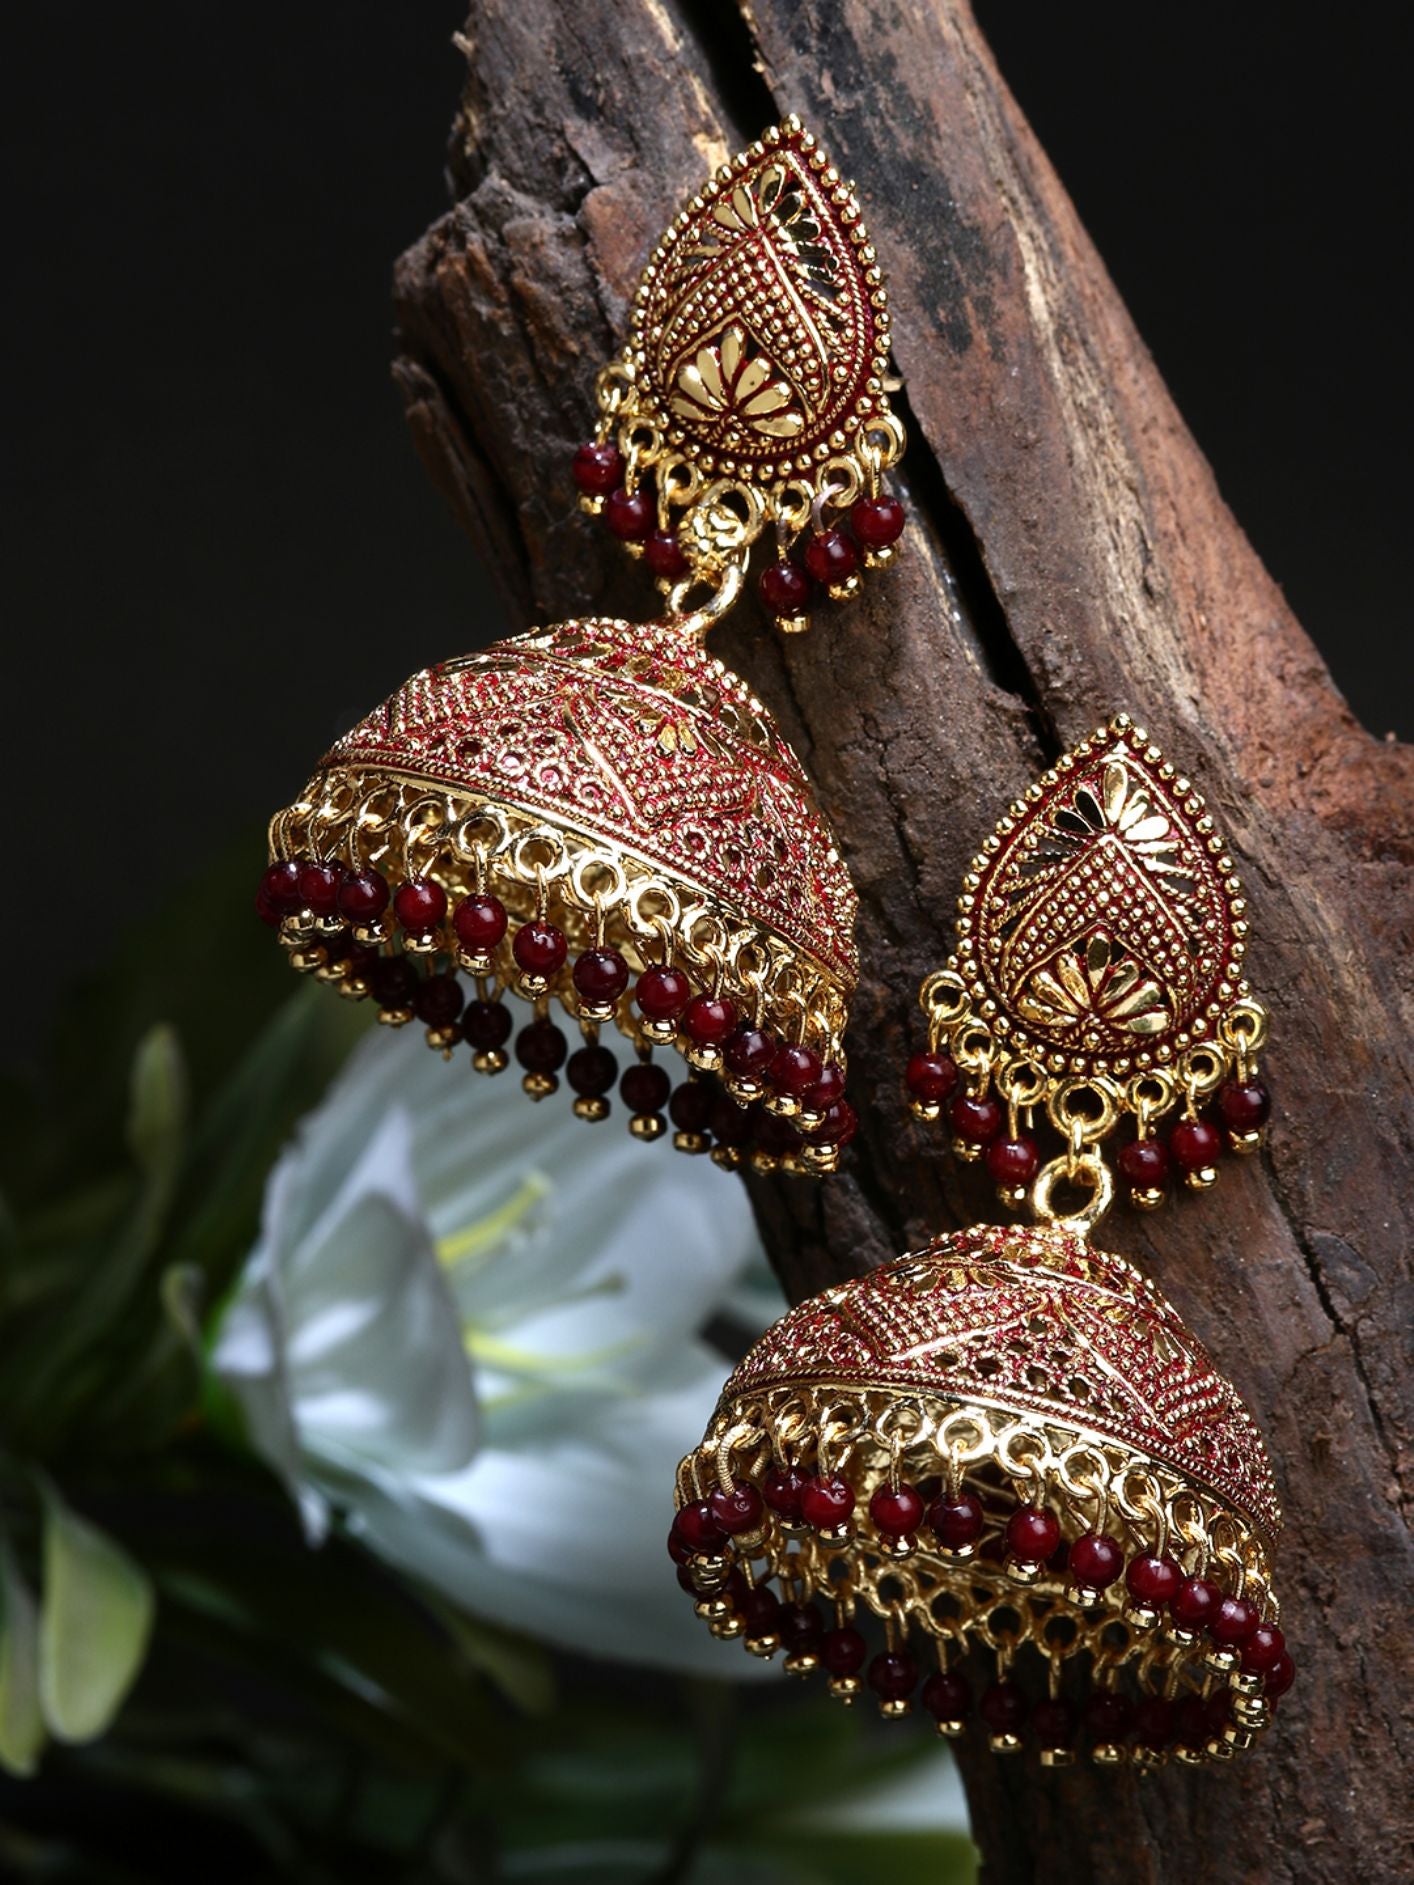 Women's Gold Plated & Maroon Dome Shaped Enamelled Jhumkas - Anikas Creation